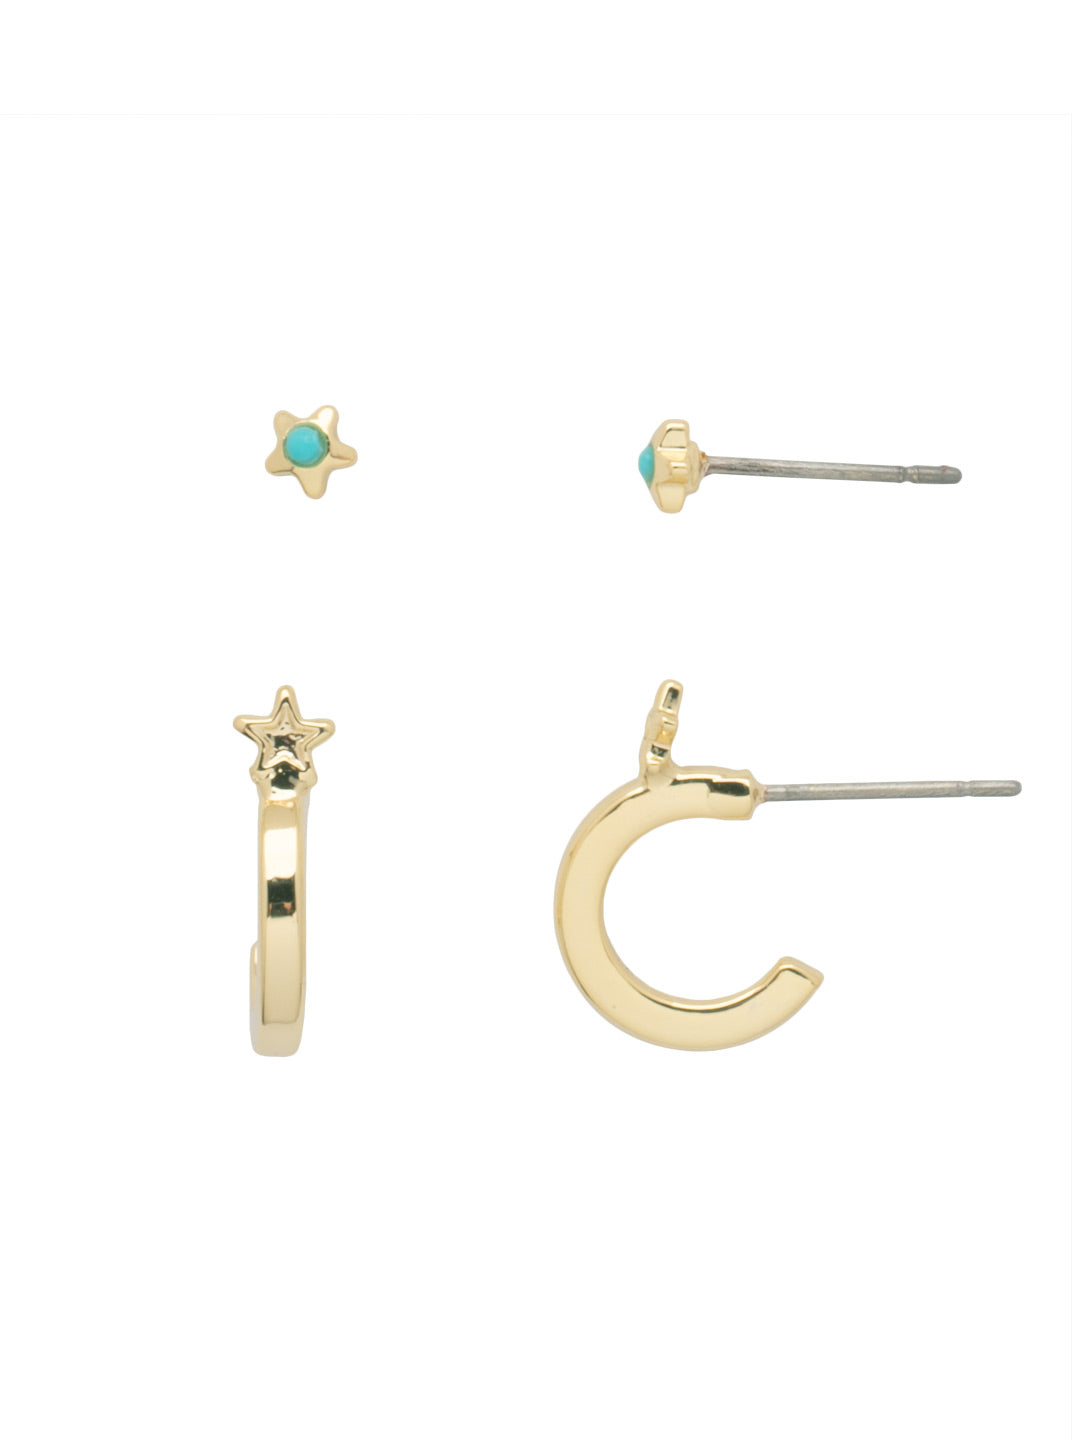 Asteria Stud and Huggie Set Earrings - EFM1BGSTO - <p>The Asteria Stud and Huggie Set Earrings feature 2 pairs of earrings, a pair of small crystal embellished star studs, and a pair of star-studded huggie hoops. From Sorrelli's Santorini collection in our Bright Gold-tone finish.</p>